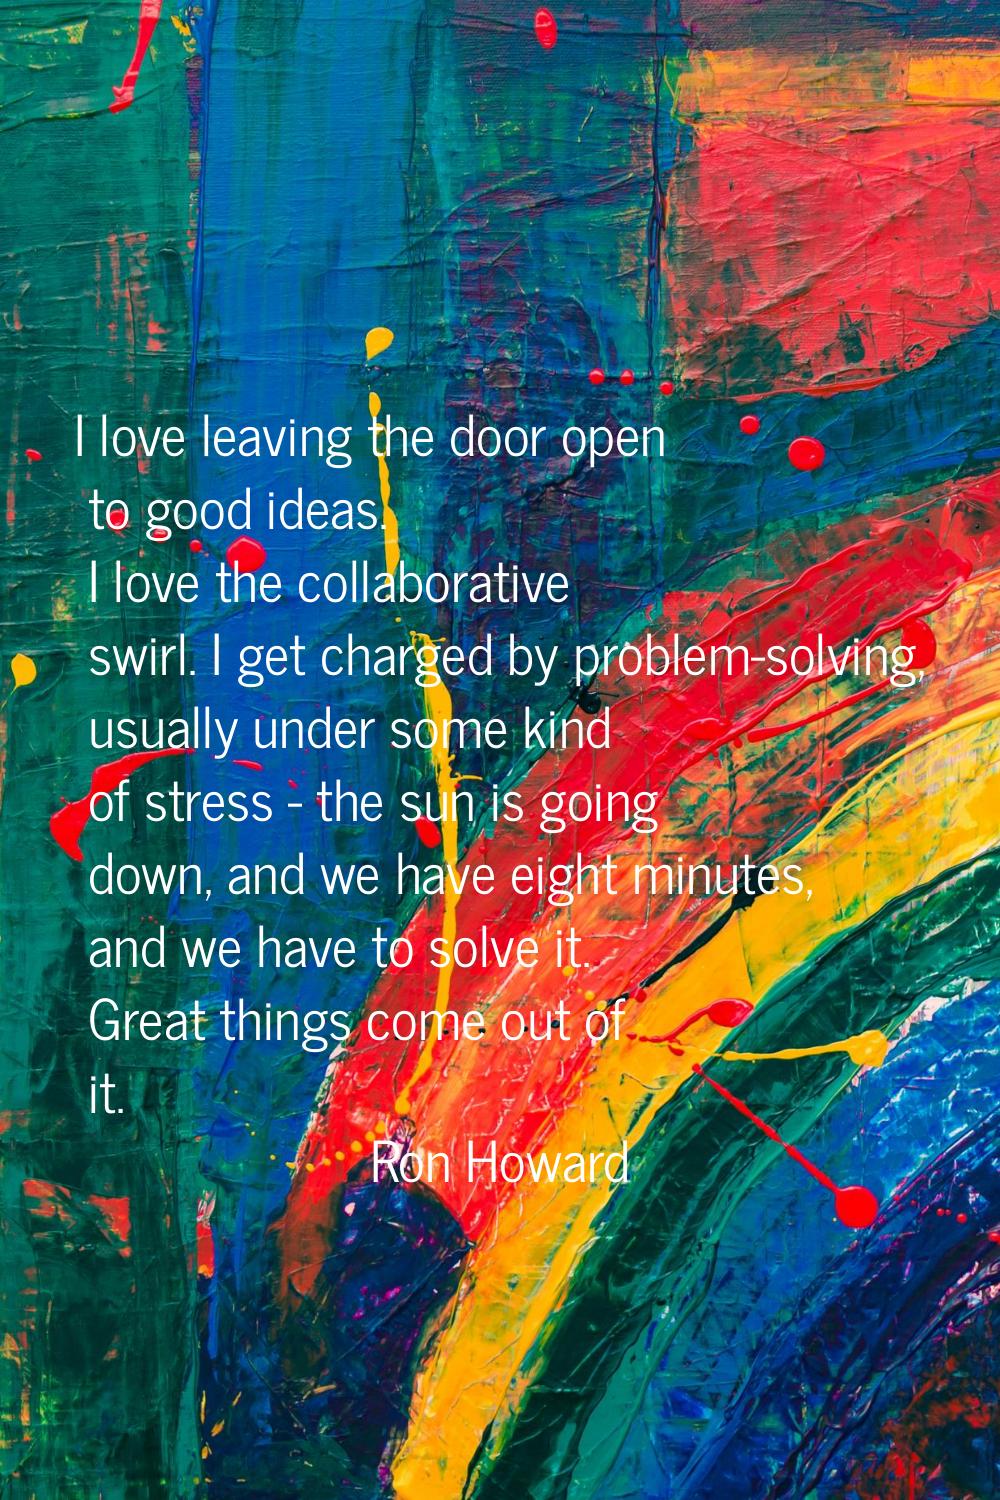 I love leaving the door open to good ideas. I love the collaborative swirl. I get charged by proble